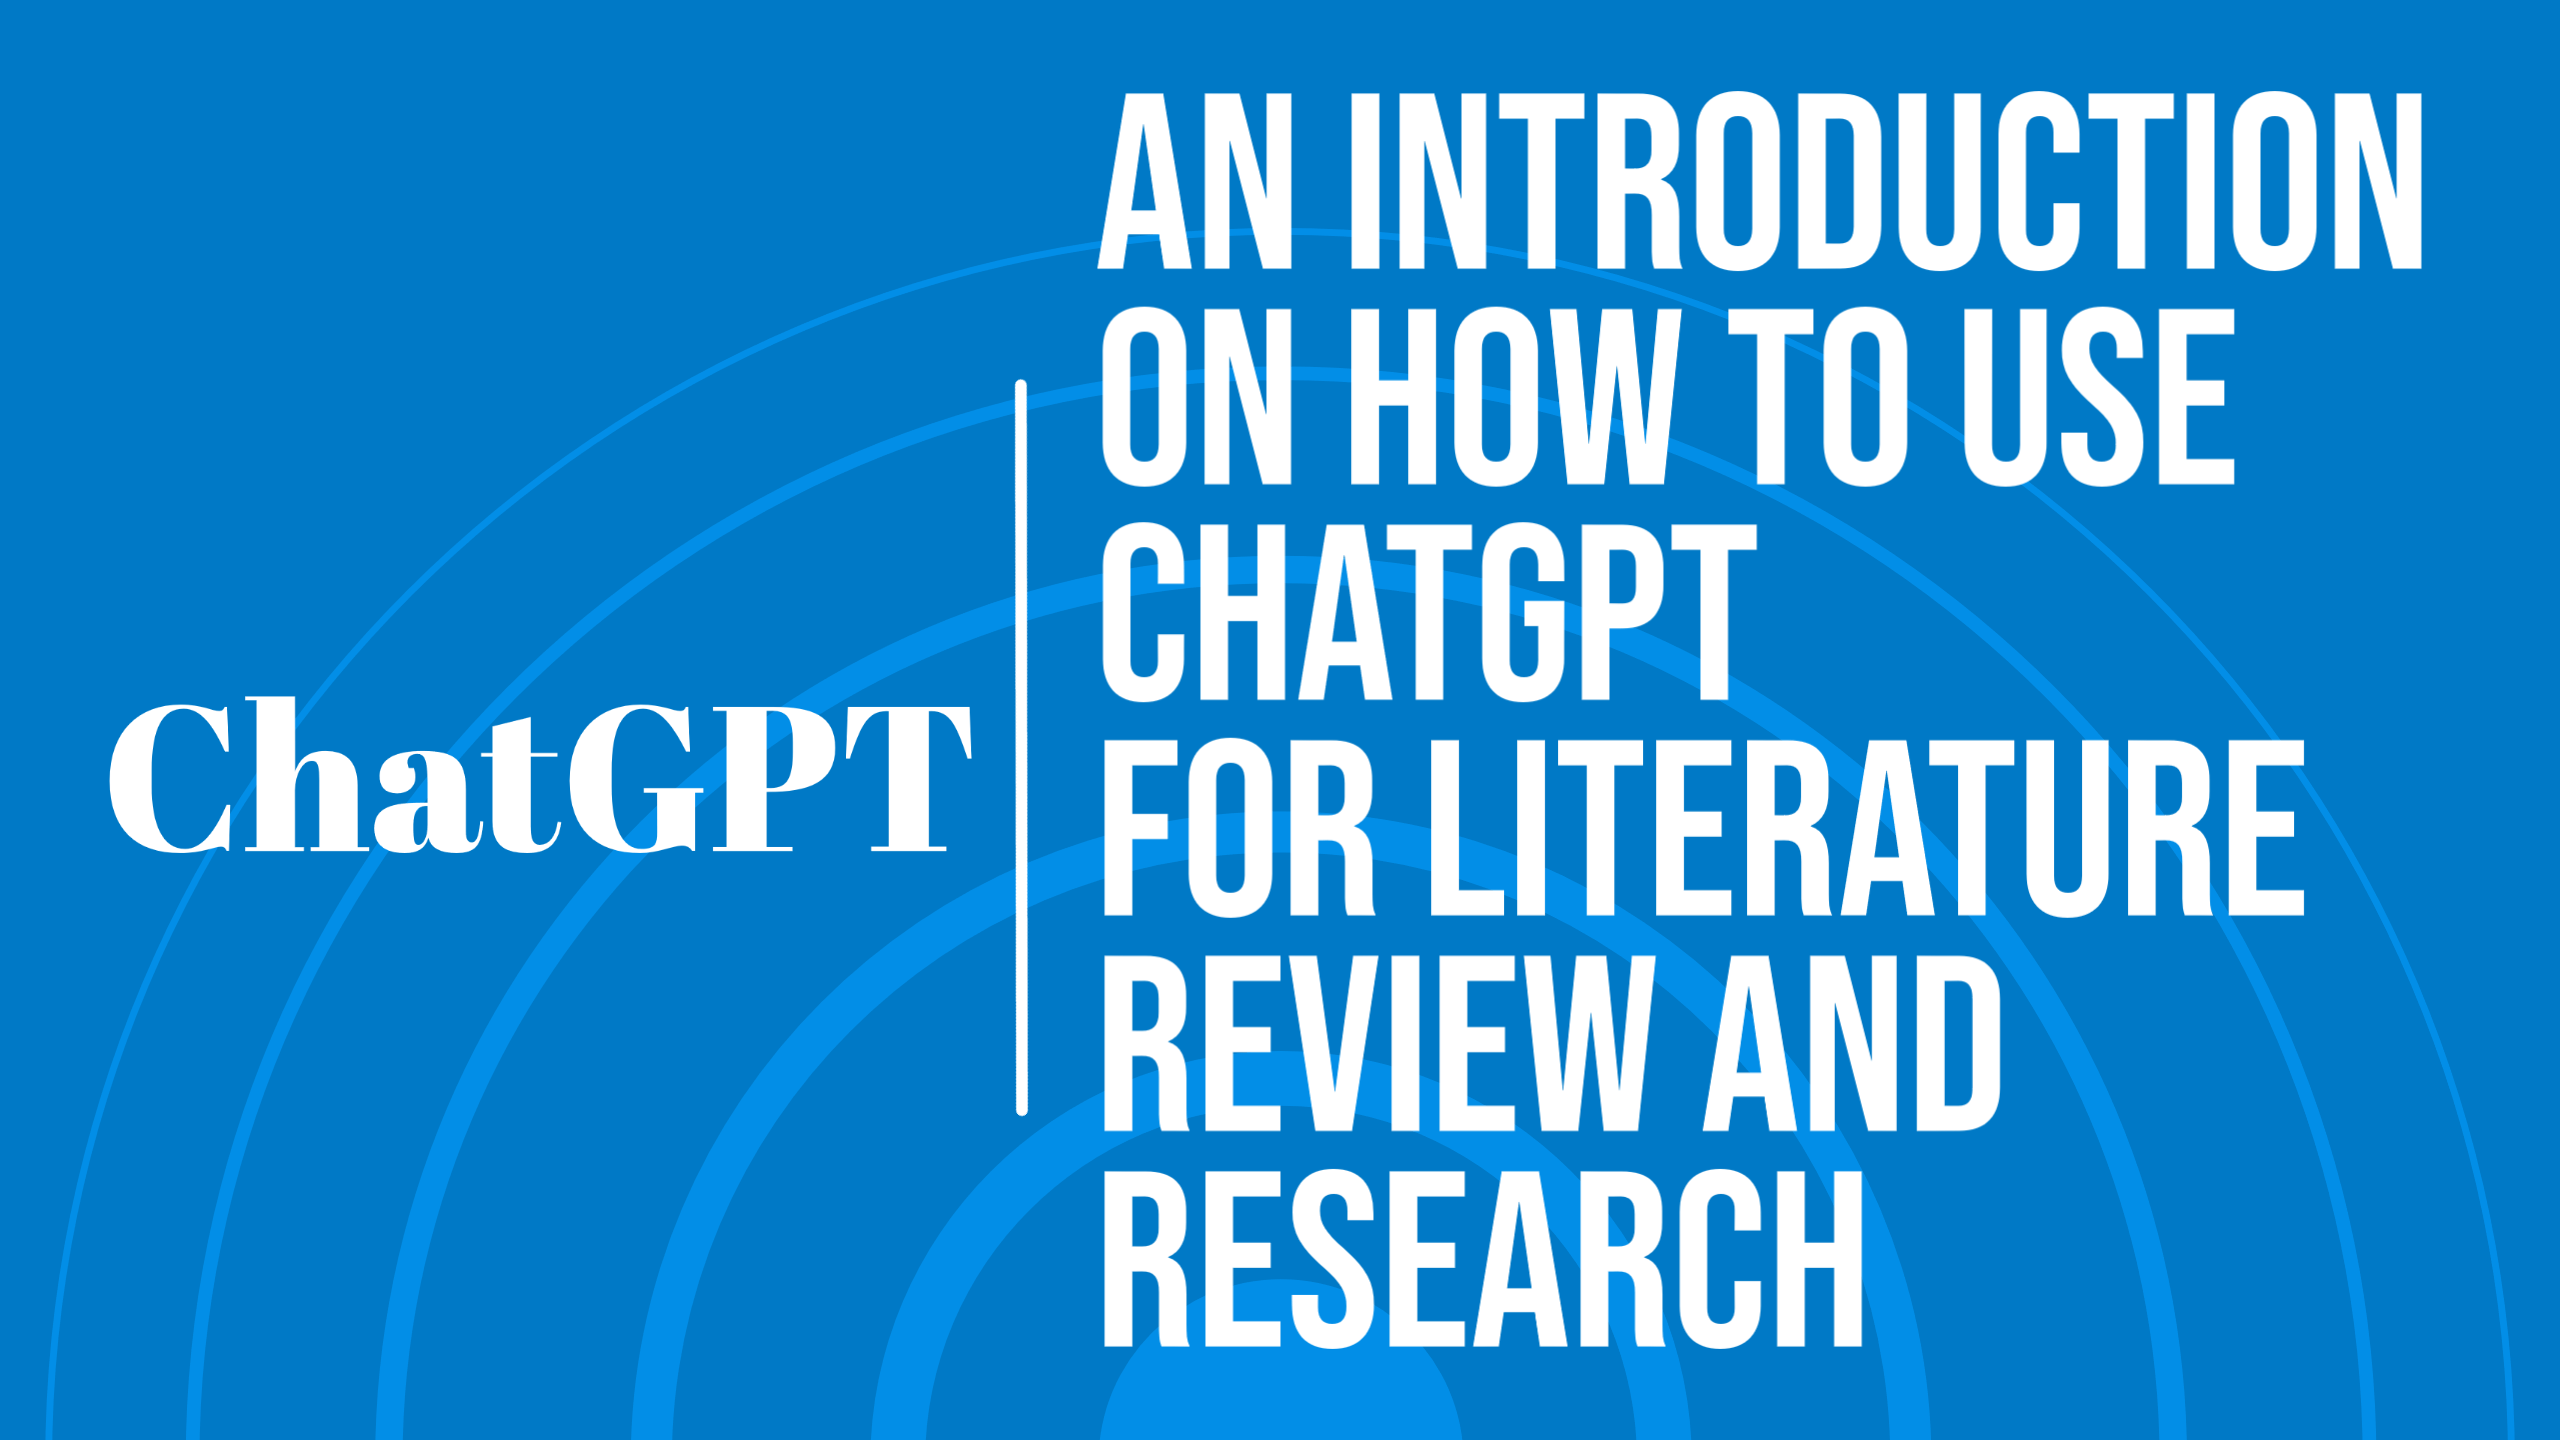 chatgpt for literature research